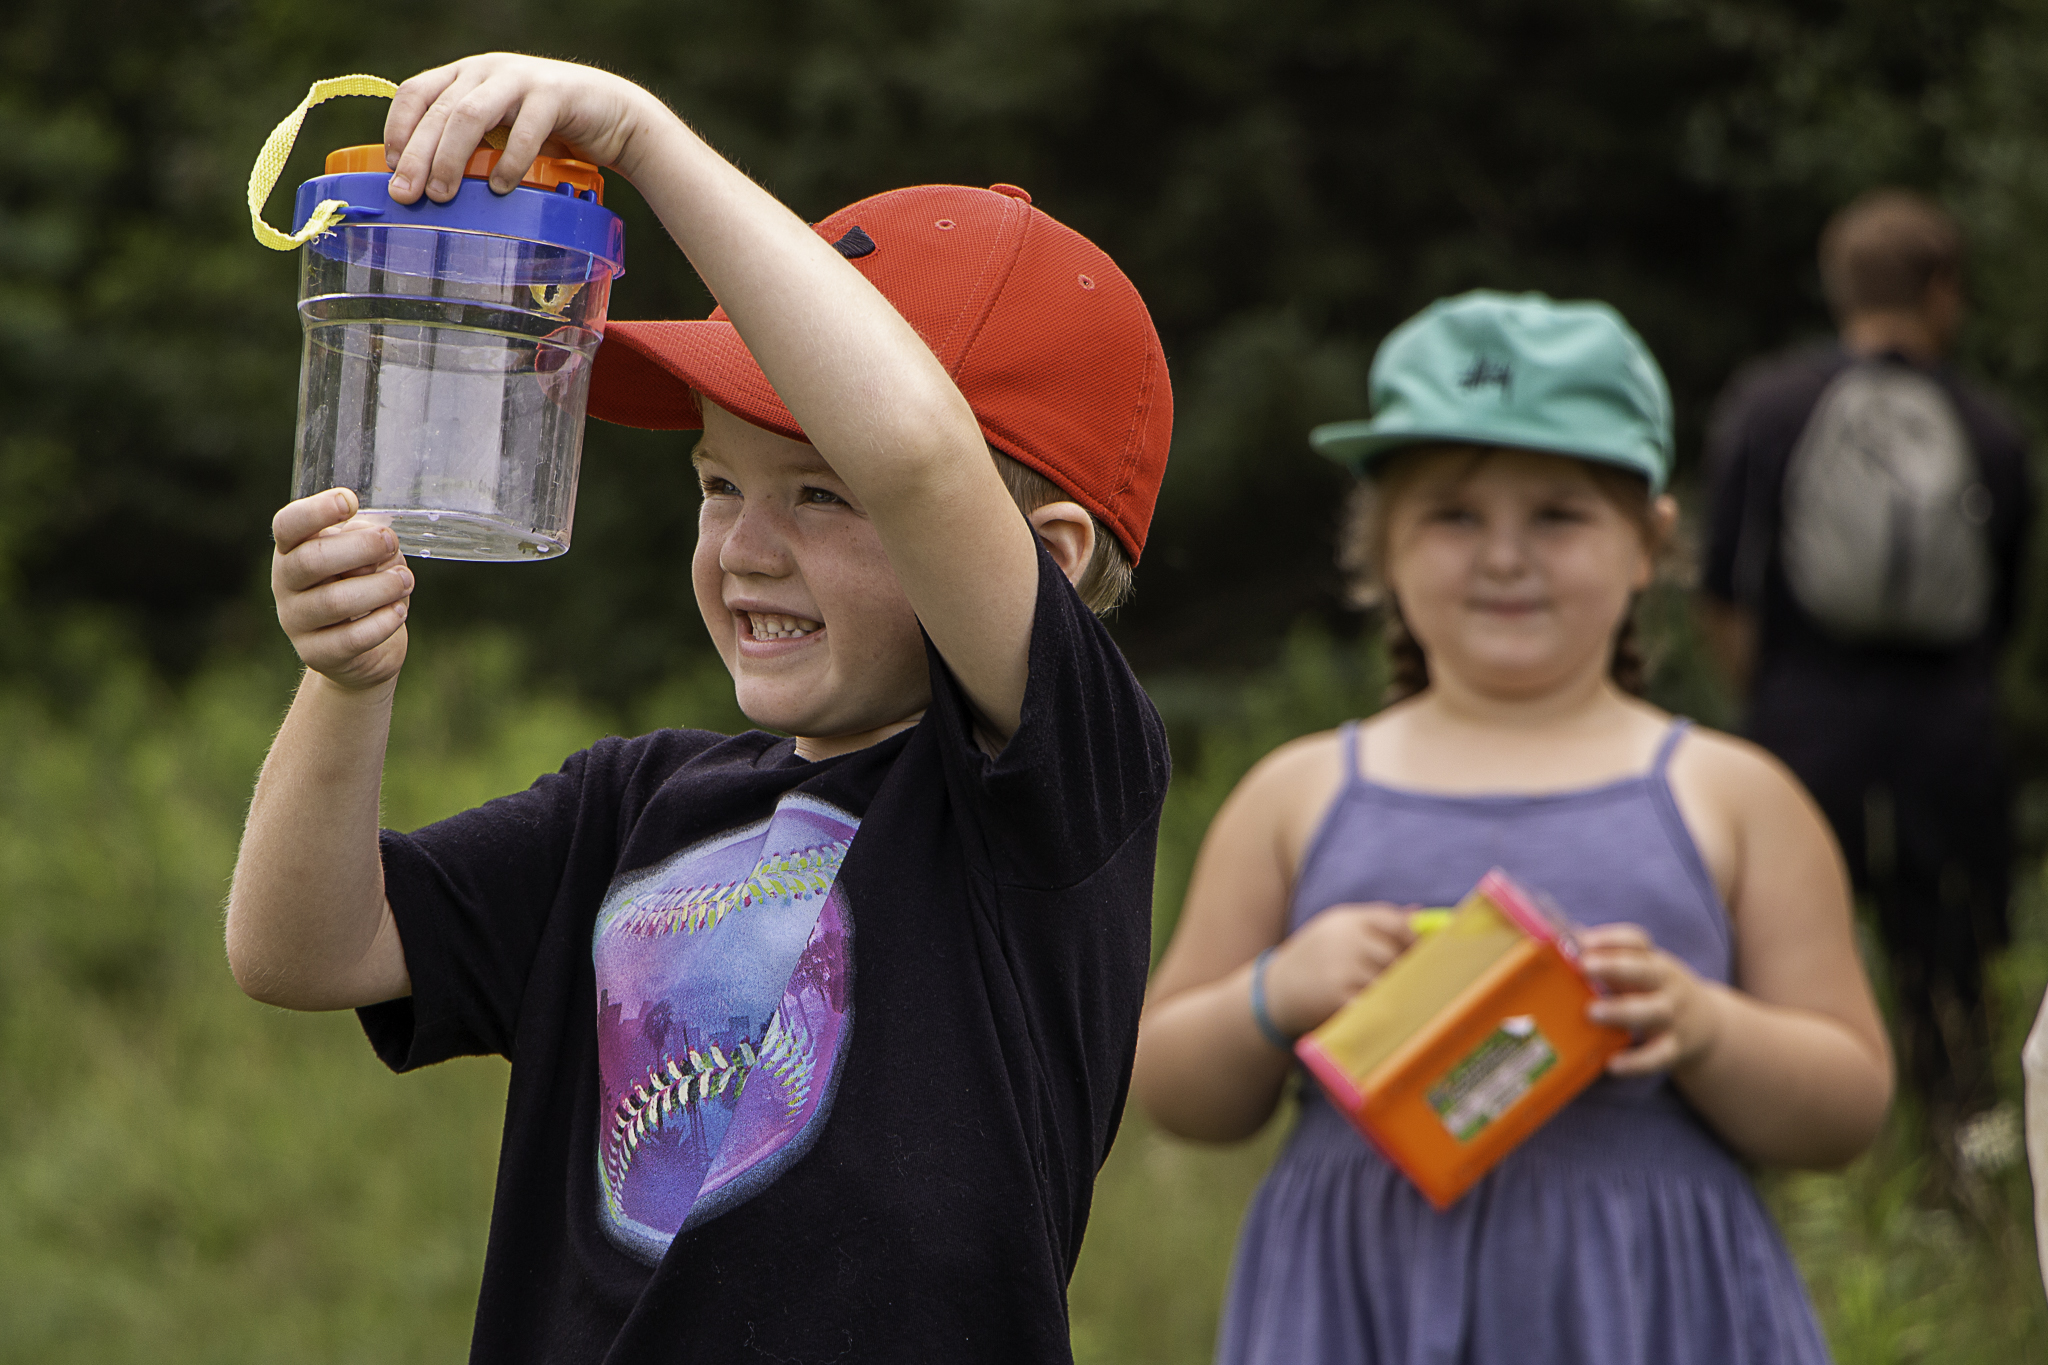 Child smiles while holding insect container